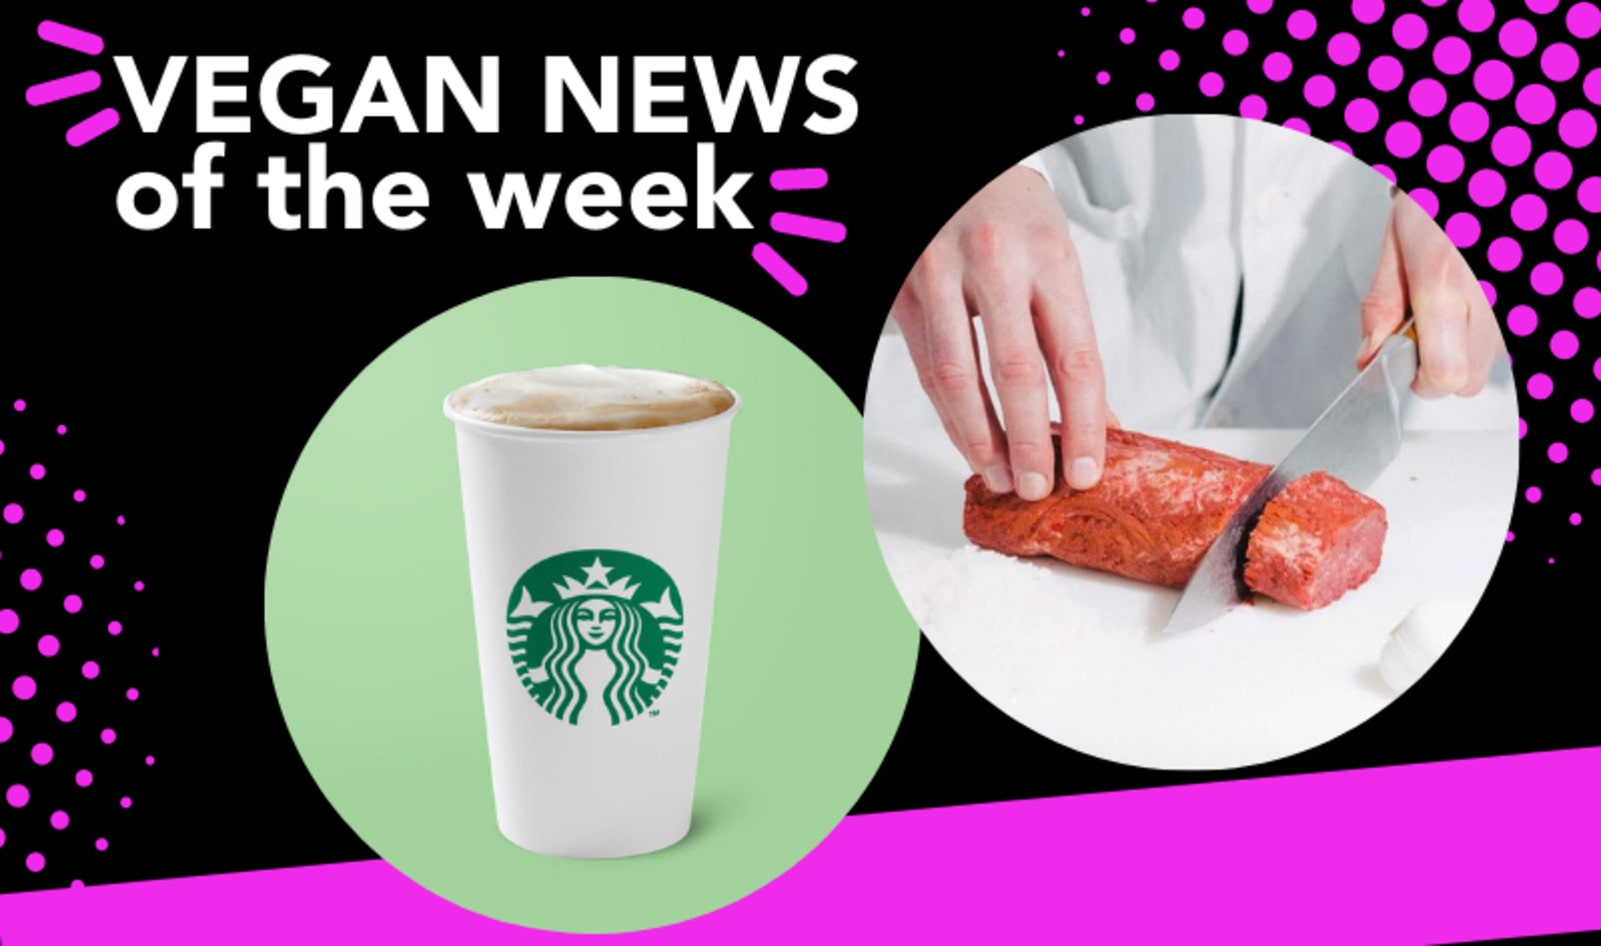 New Oat Drink at Starbucks, Meatless Mignon, and More Vegan News of the Week